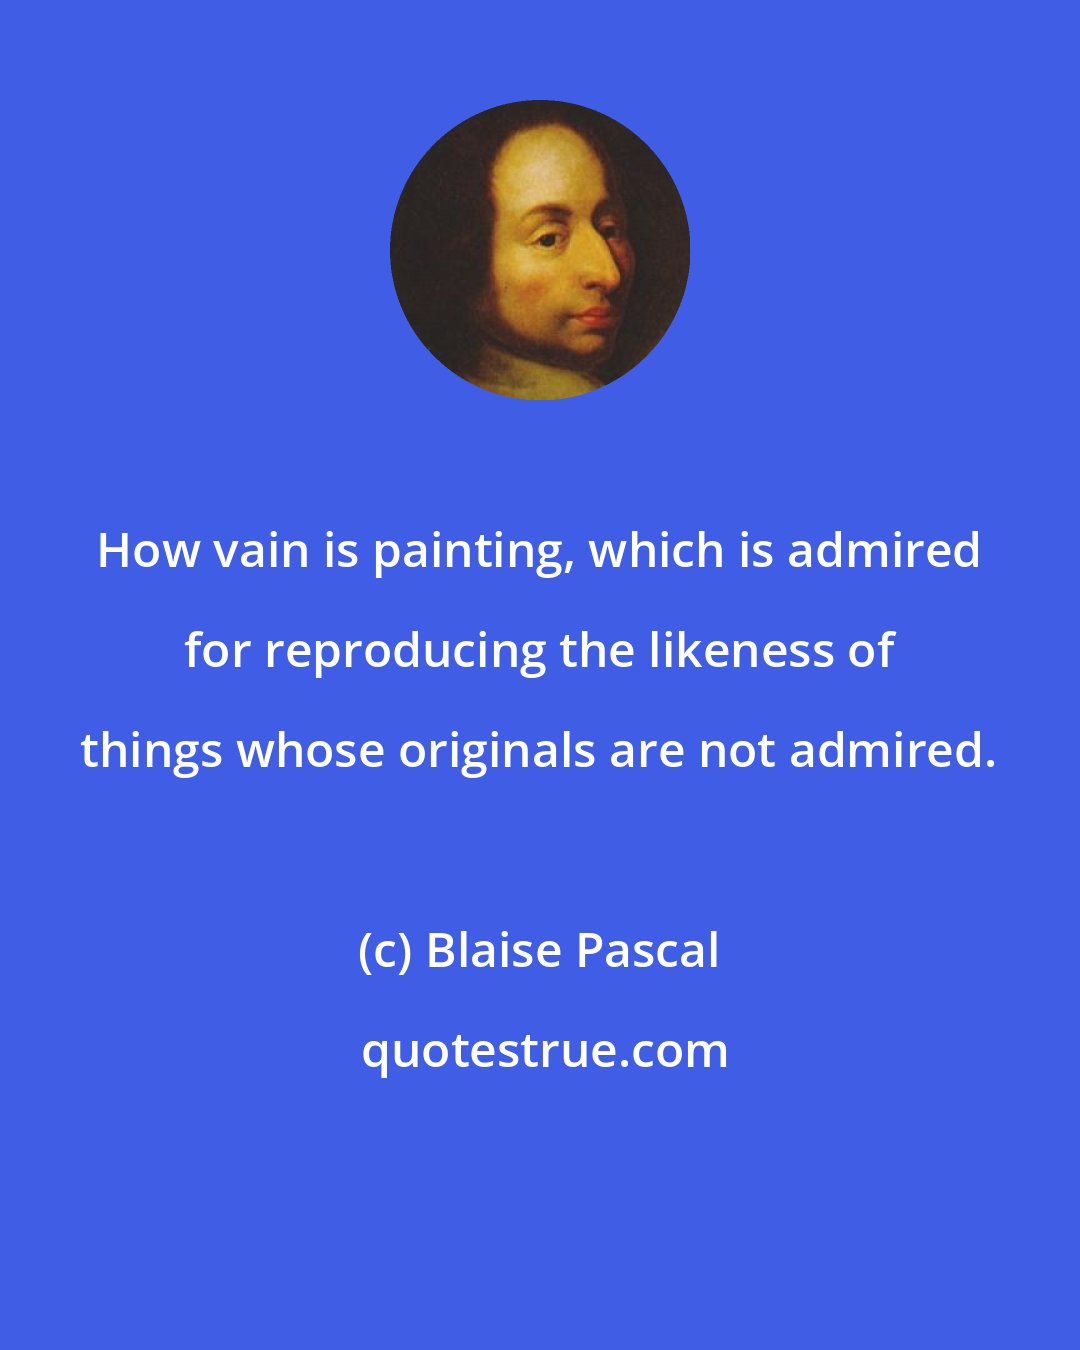 Blaise Pascal: How vain is painting, which is admired for reproducing the likeness of things whose originals are not admired.